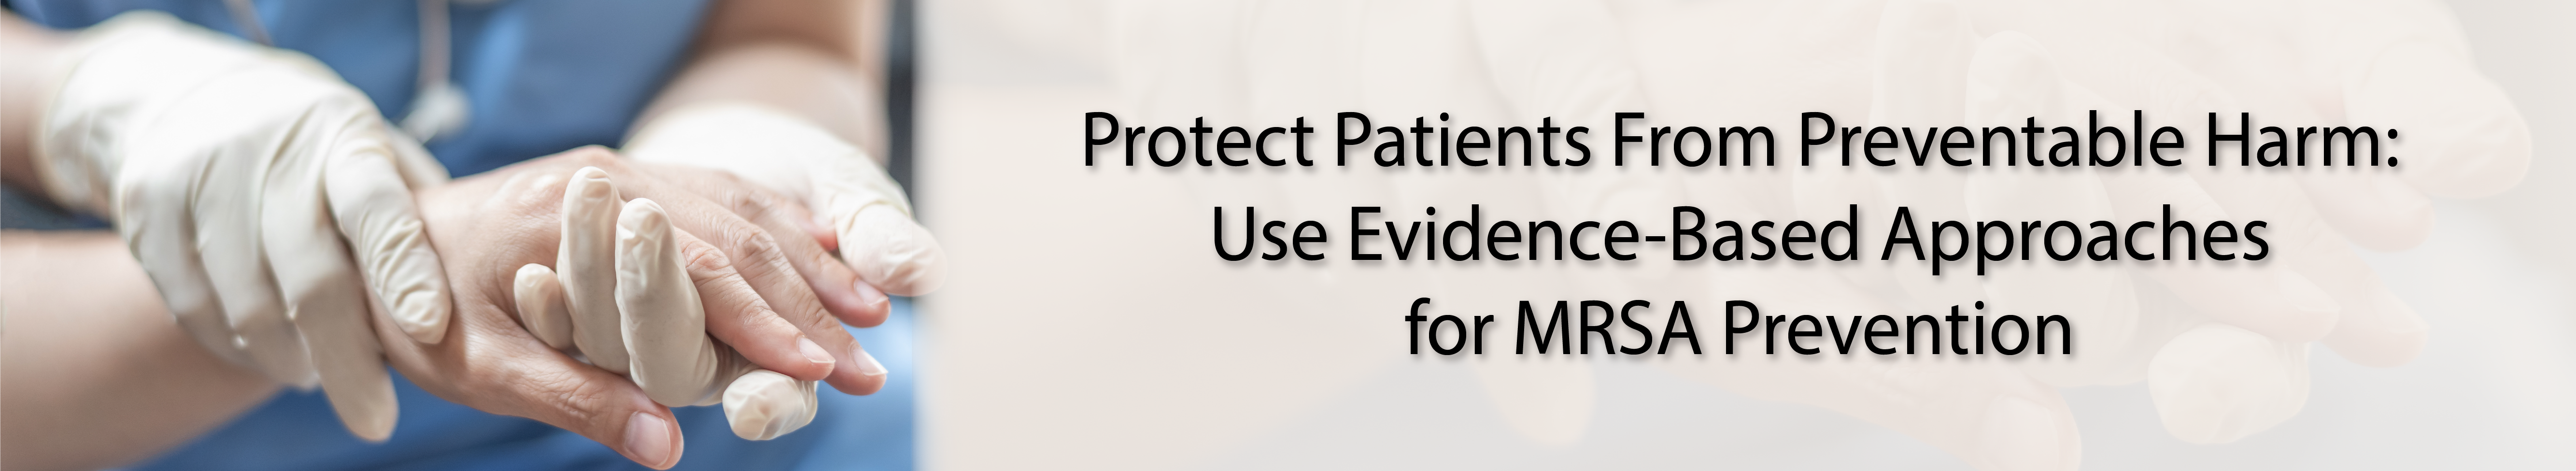 Protect Patients From Preventable Harm banner